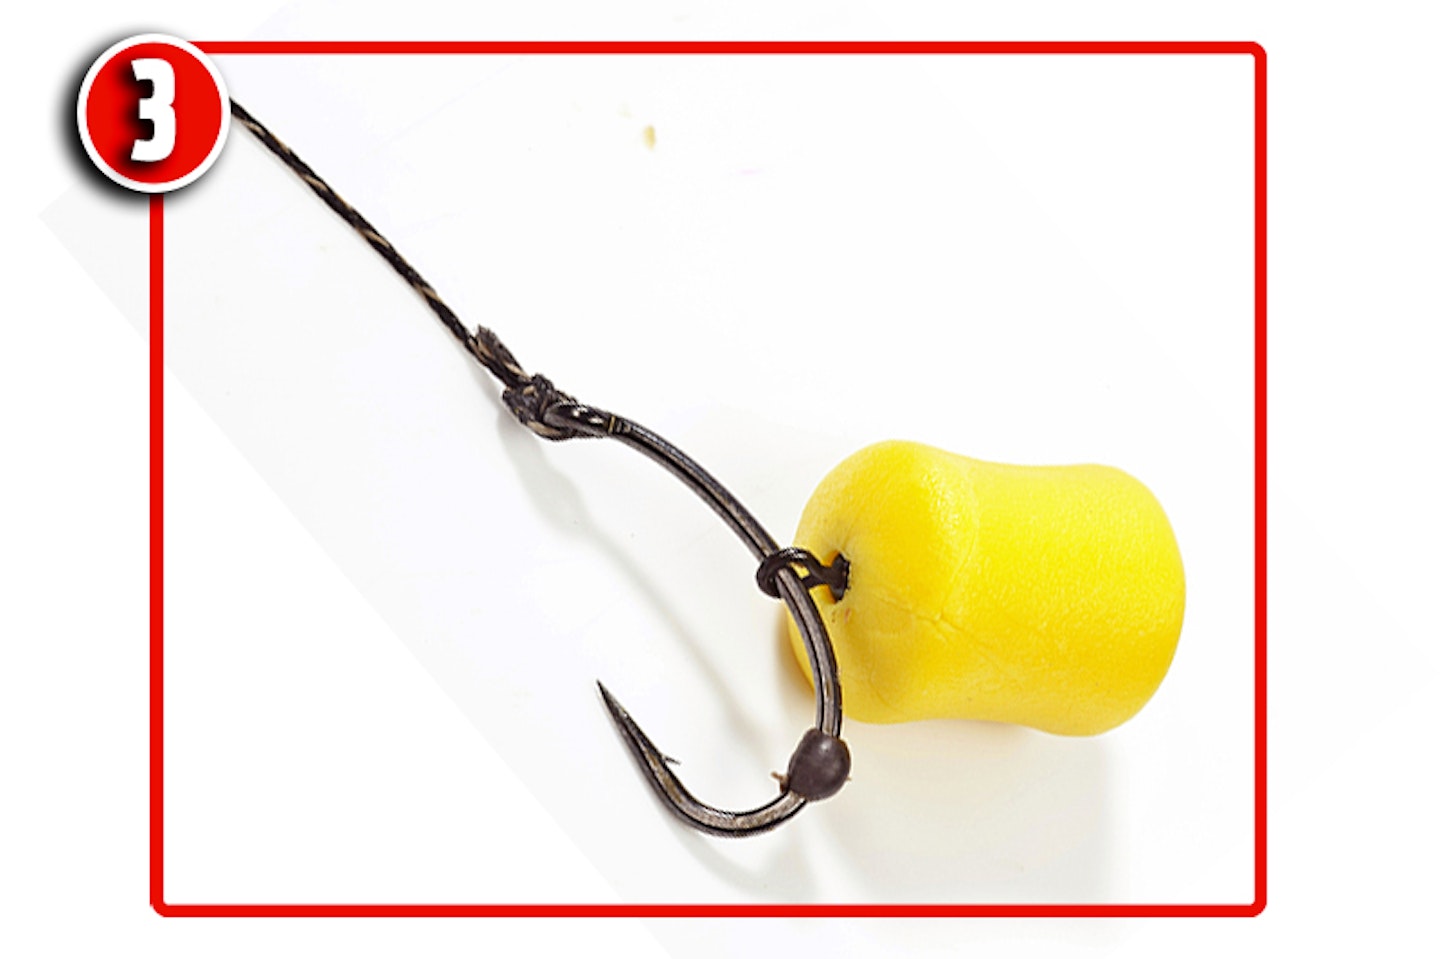 Position the hook bead and then attach the bait to the swivel using bait floss or a small bait band. 